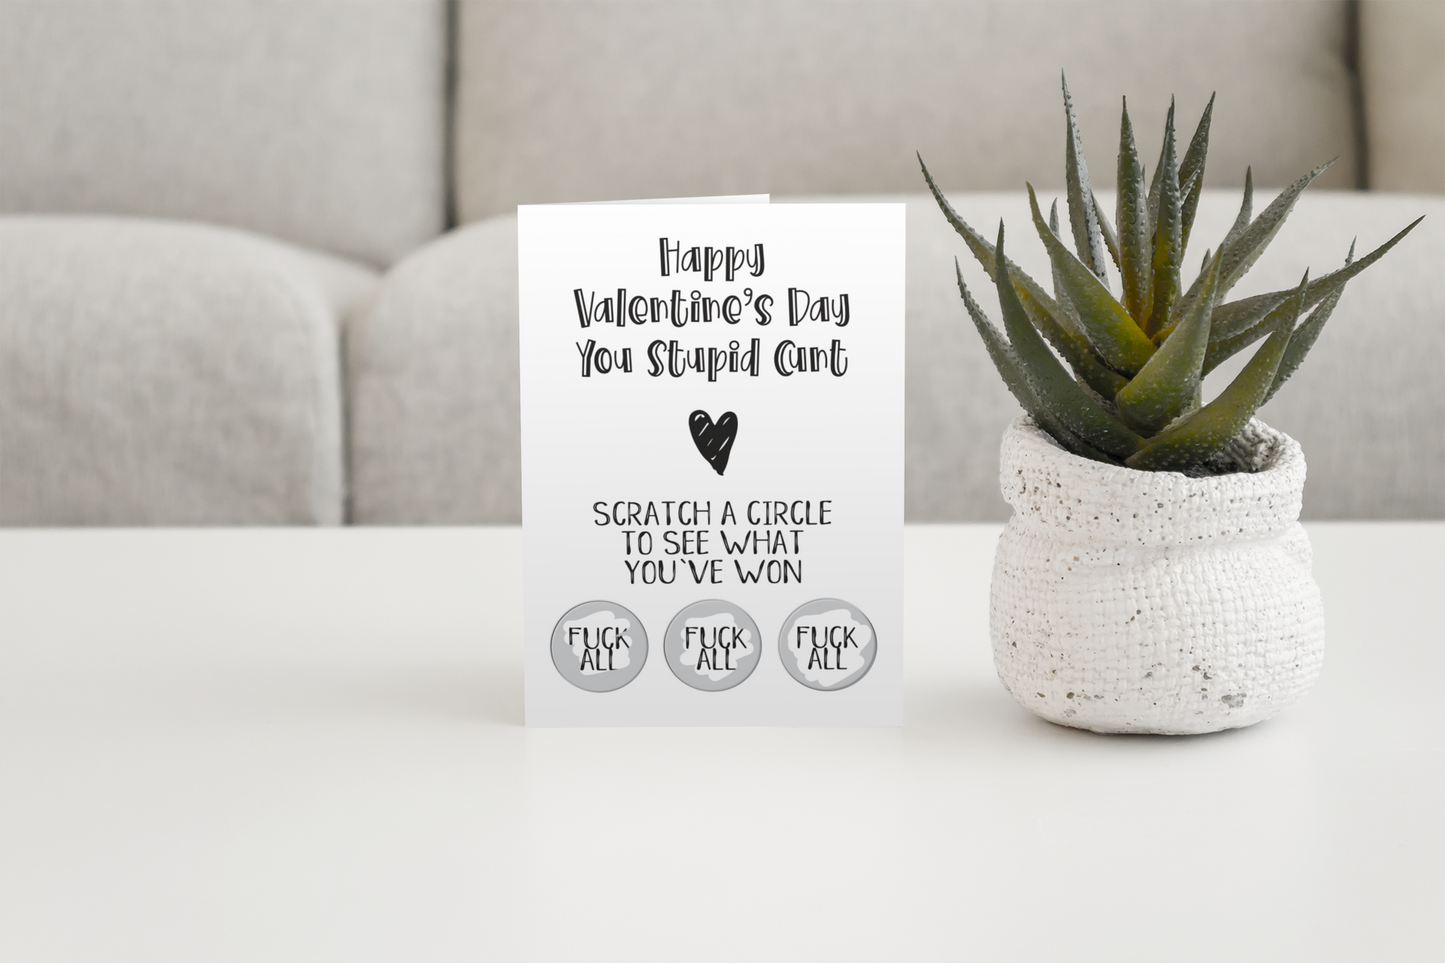 White vertical greetings card saying 'happy valentine's day you stupid c*nt' with a heart underneath. Then below is 'scratch a circle to win a prize'. To the bottom are 3 scratch stickers revealing the prizes. All printed in black ink.